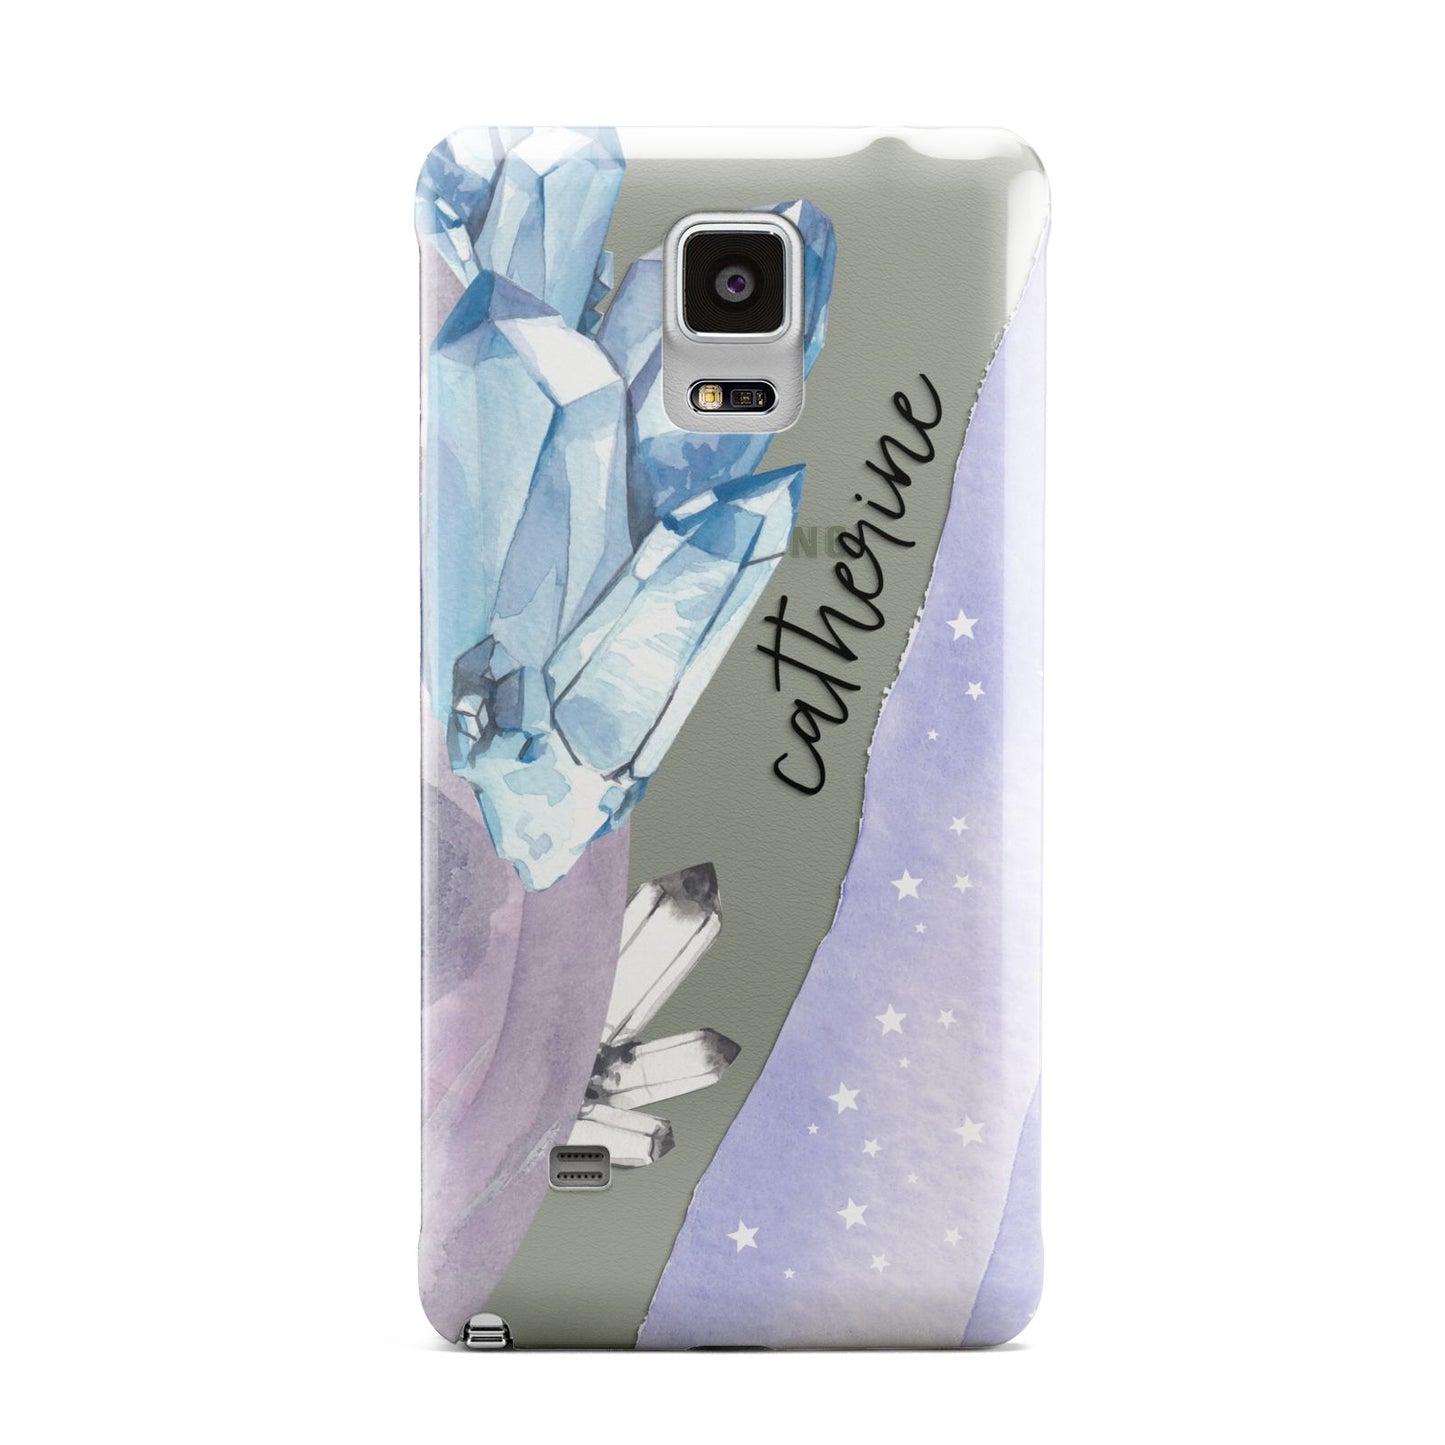 Crystals Personalised Name Samsung Galaxy Note 4 Case